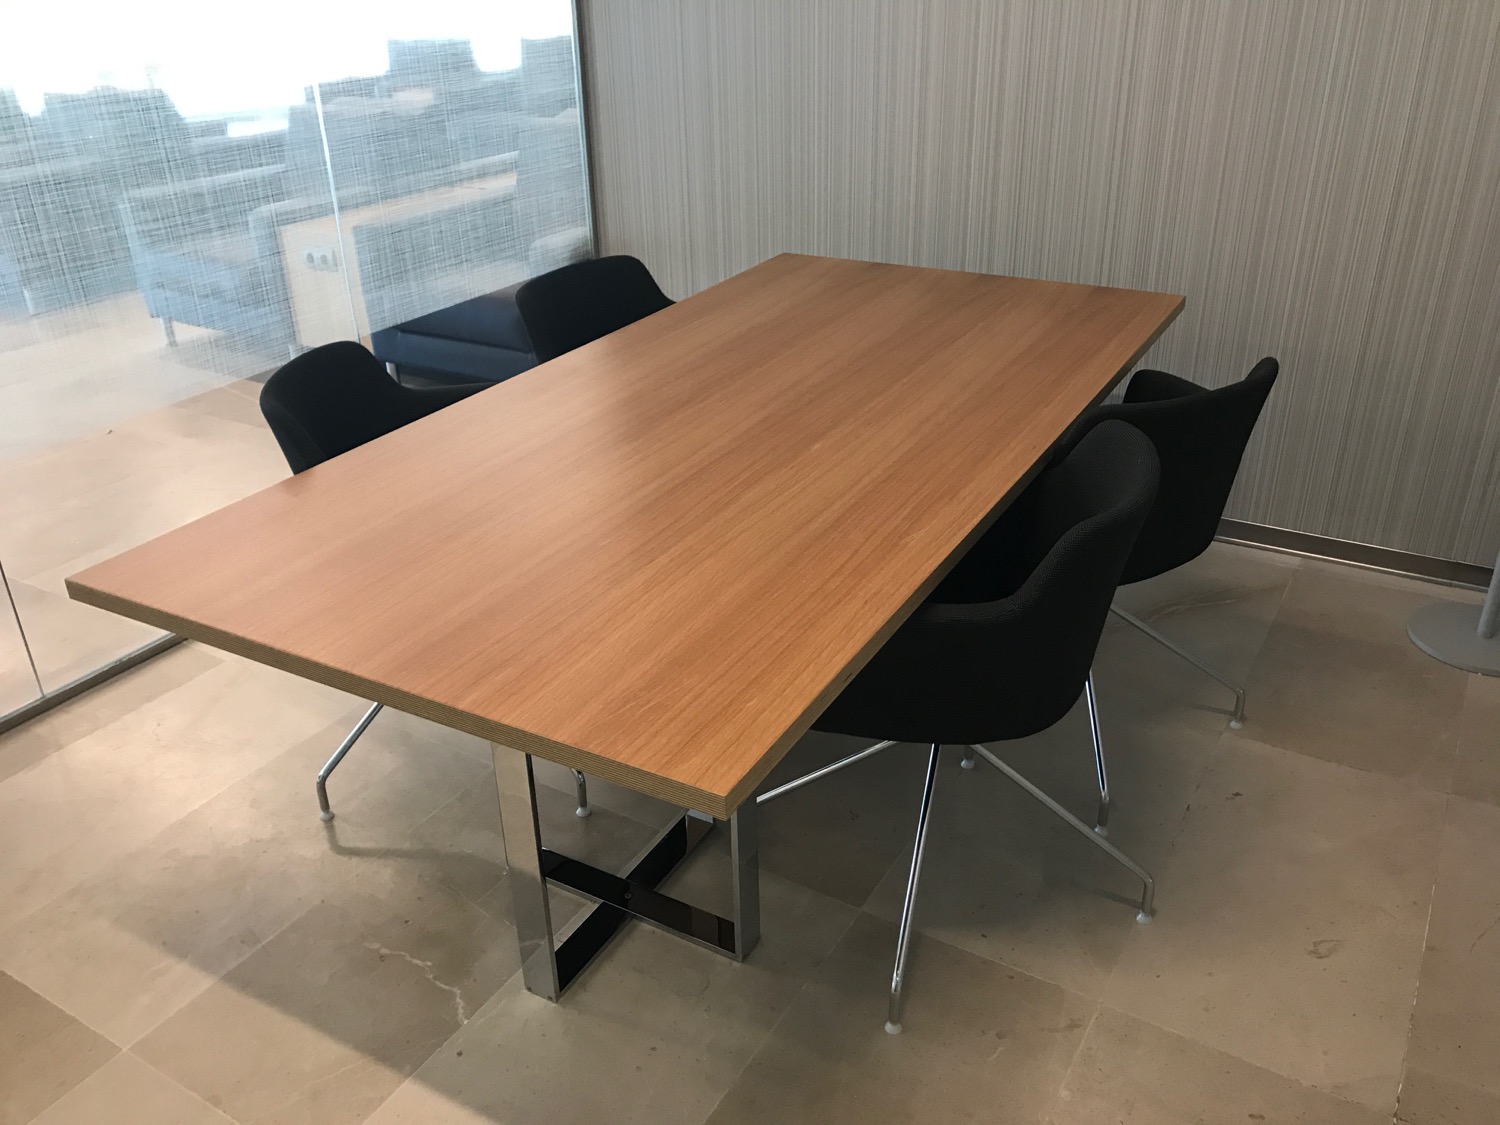 a table with chairs in a room